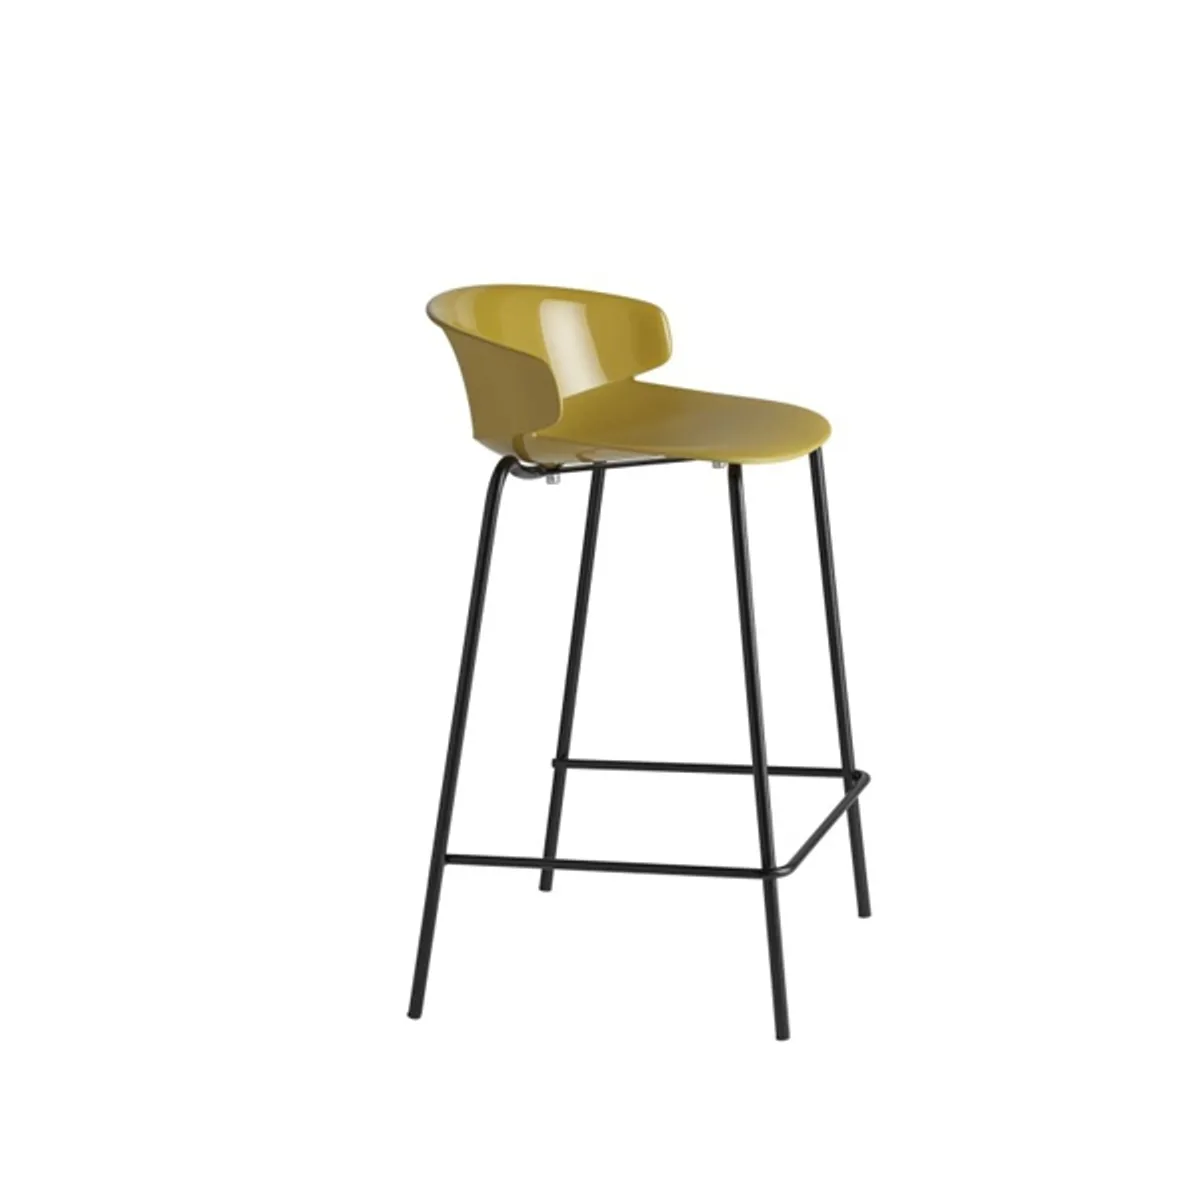 Classy bar stool Inside Out Contracts3